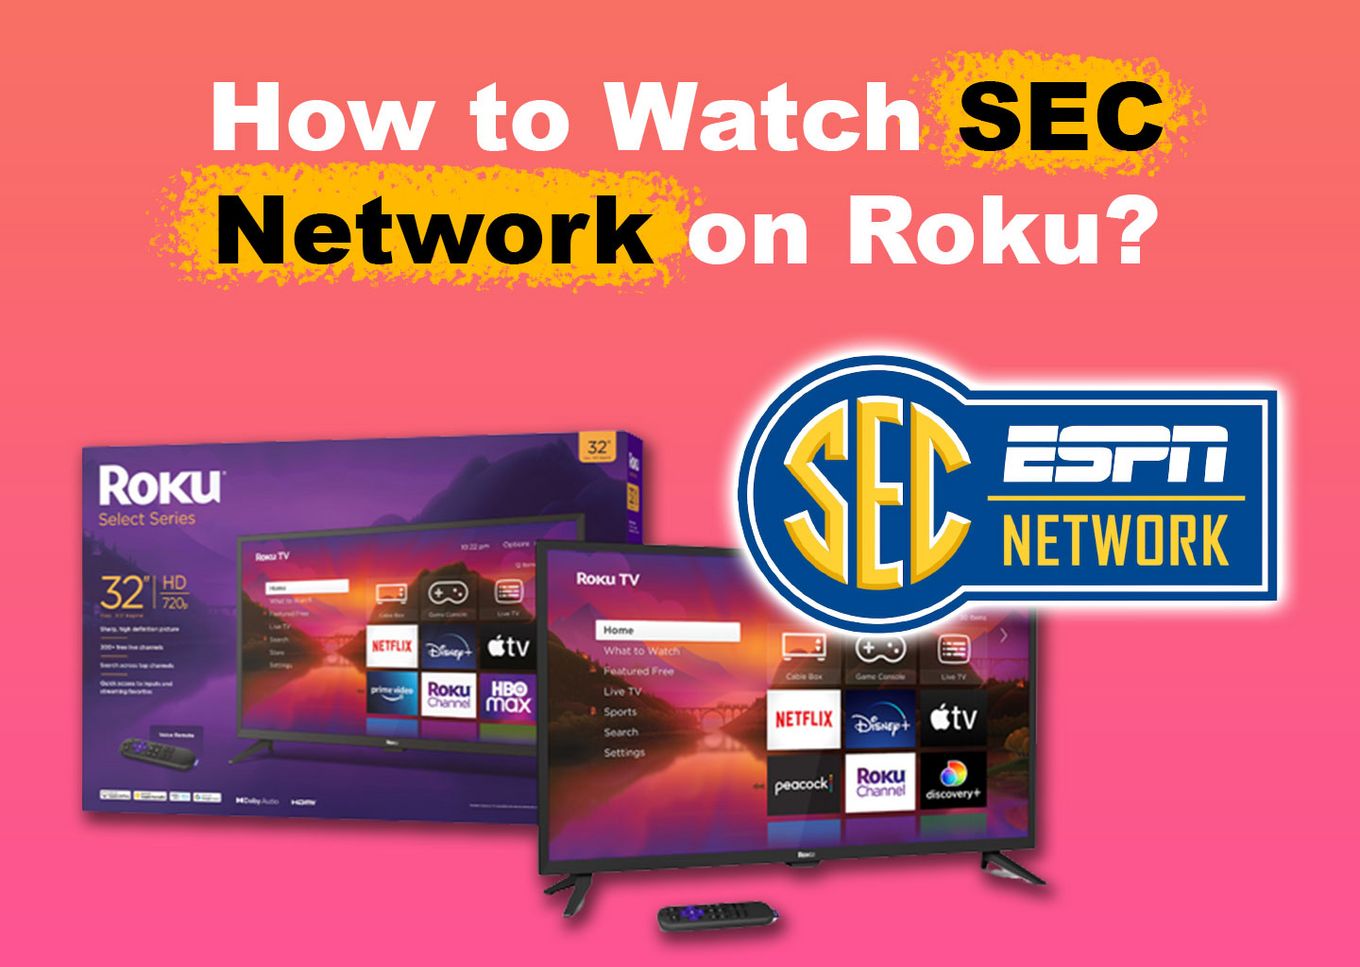 How to watch SEC Network on Roku